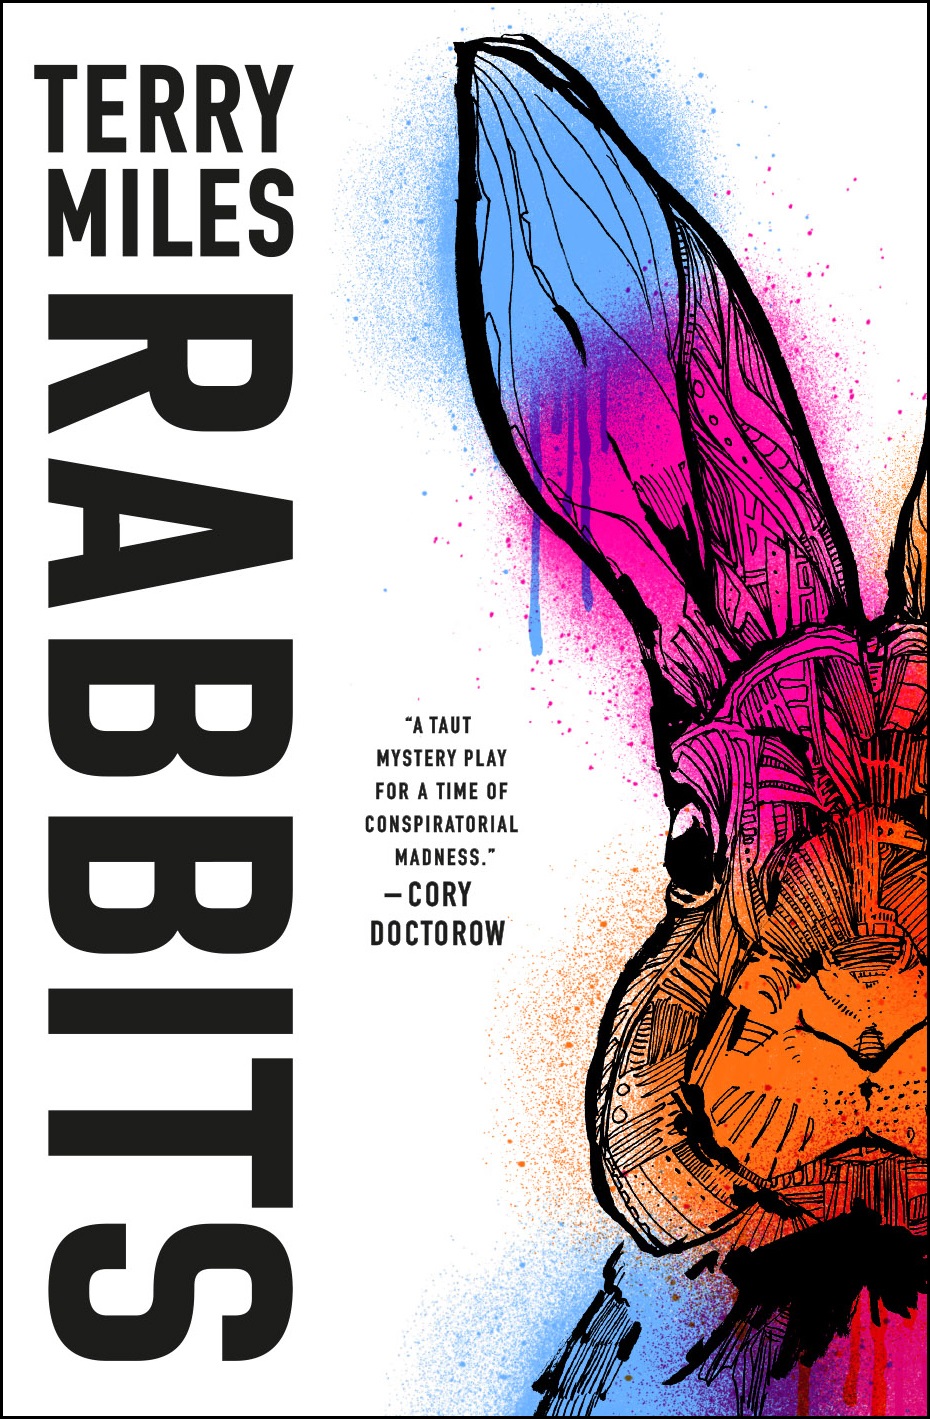 The book cover for Terry Miles' Rabbits novelization.  (Image: Del Rey Books)